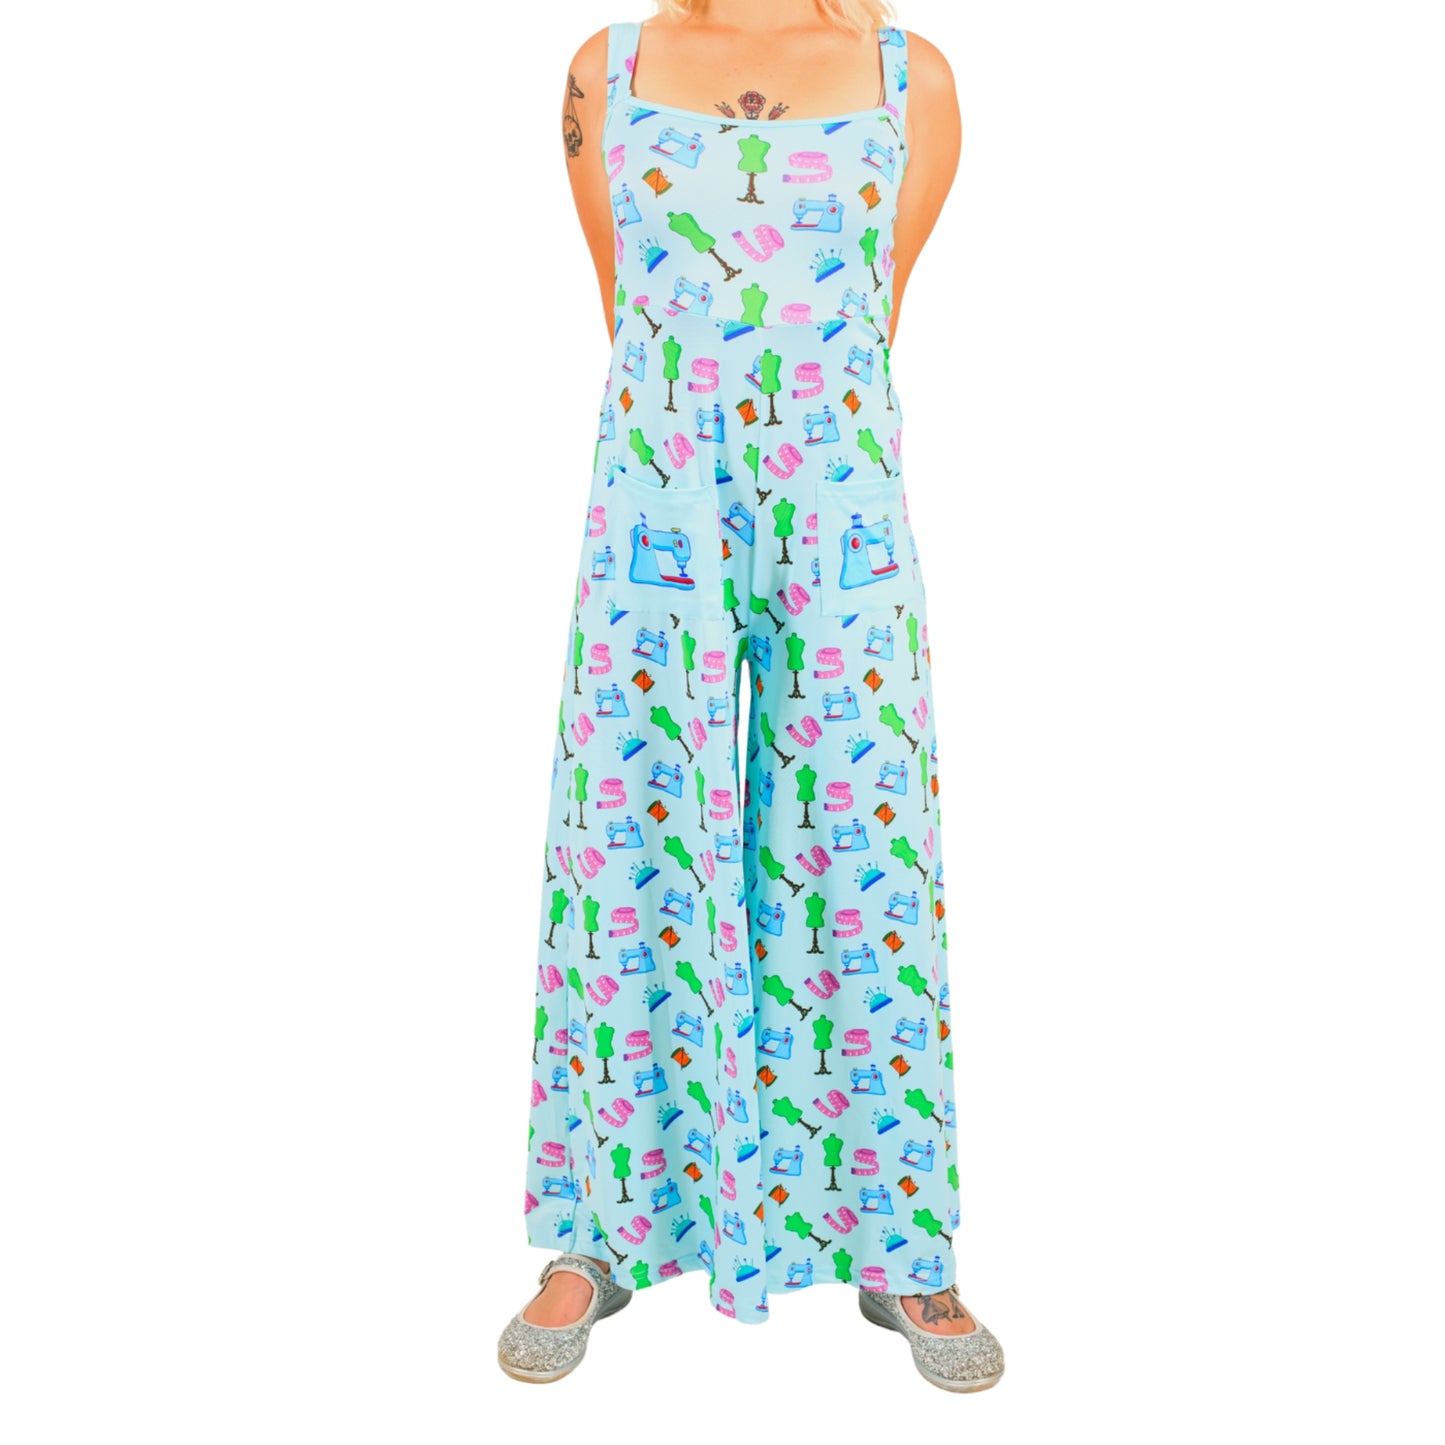 Haberdashery Jumpsuit by RainbowsAndFairies.com.au (Sewing - Dressmaking - Overalls - Wide Leg Pants - Kitsch - Rockabilly) - SKU: CL_JUMPS_HABER_ORG - Pic-01